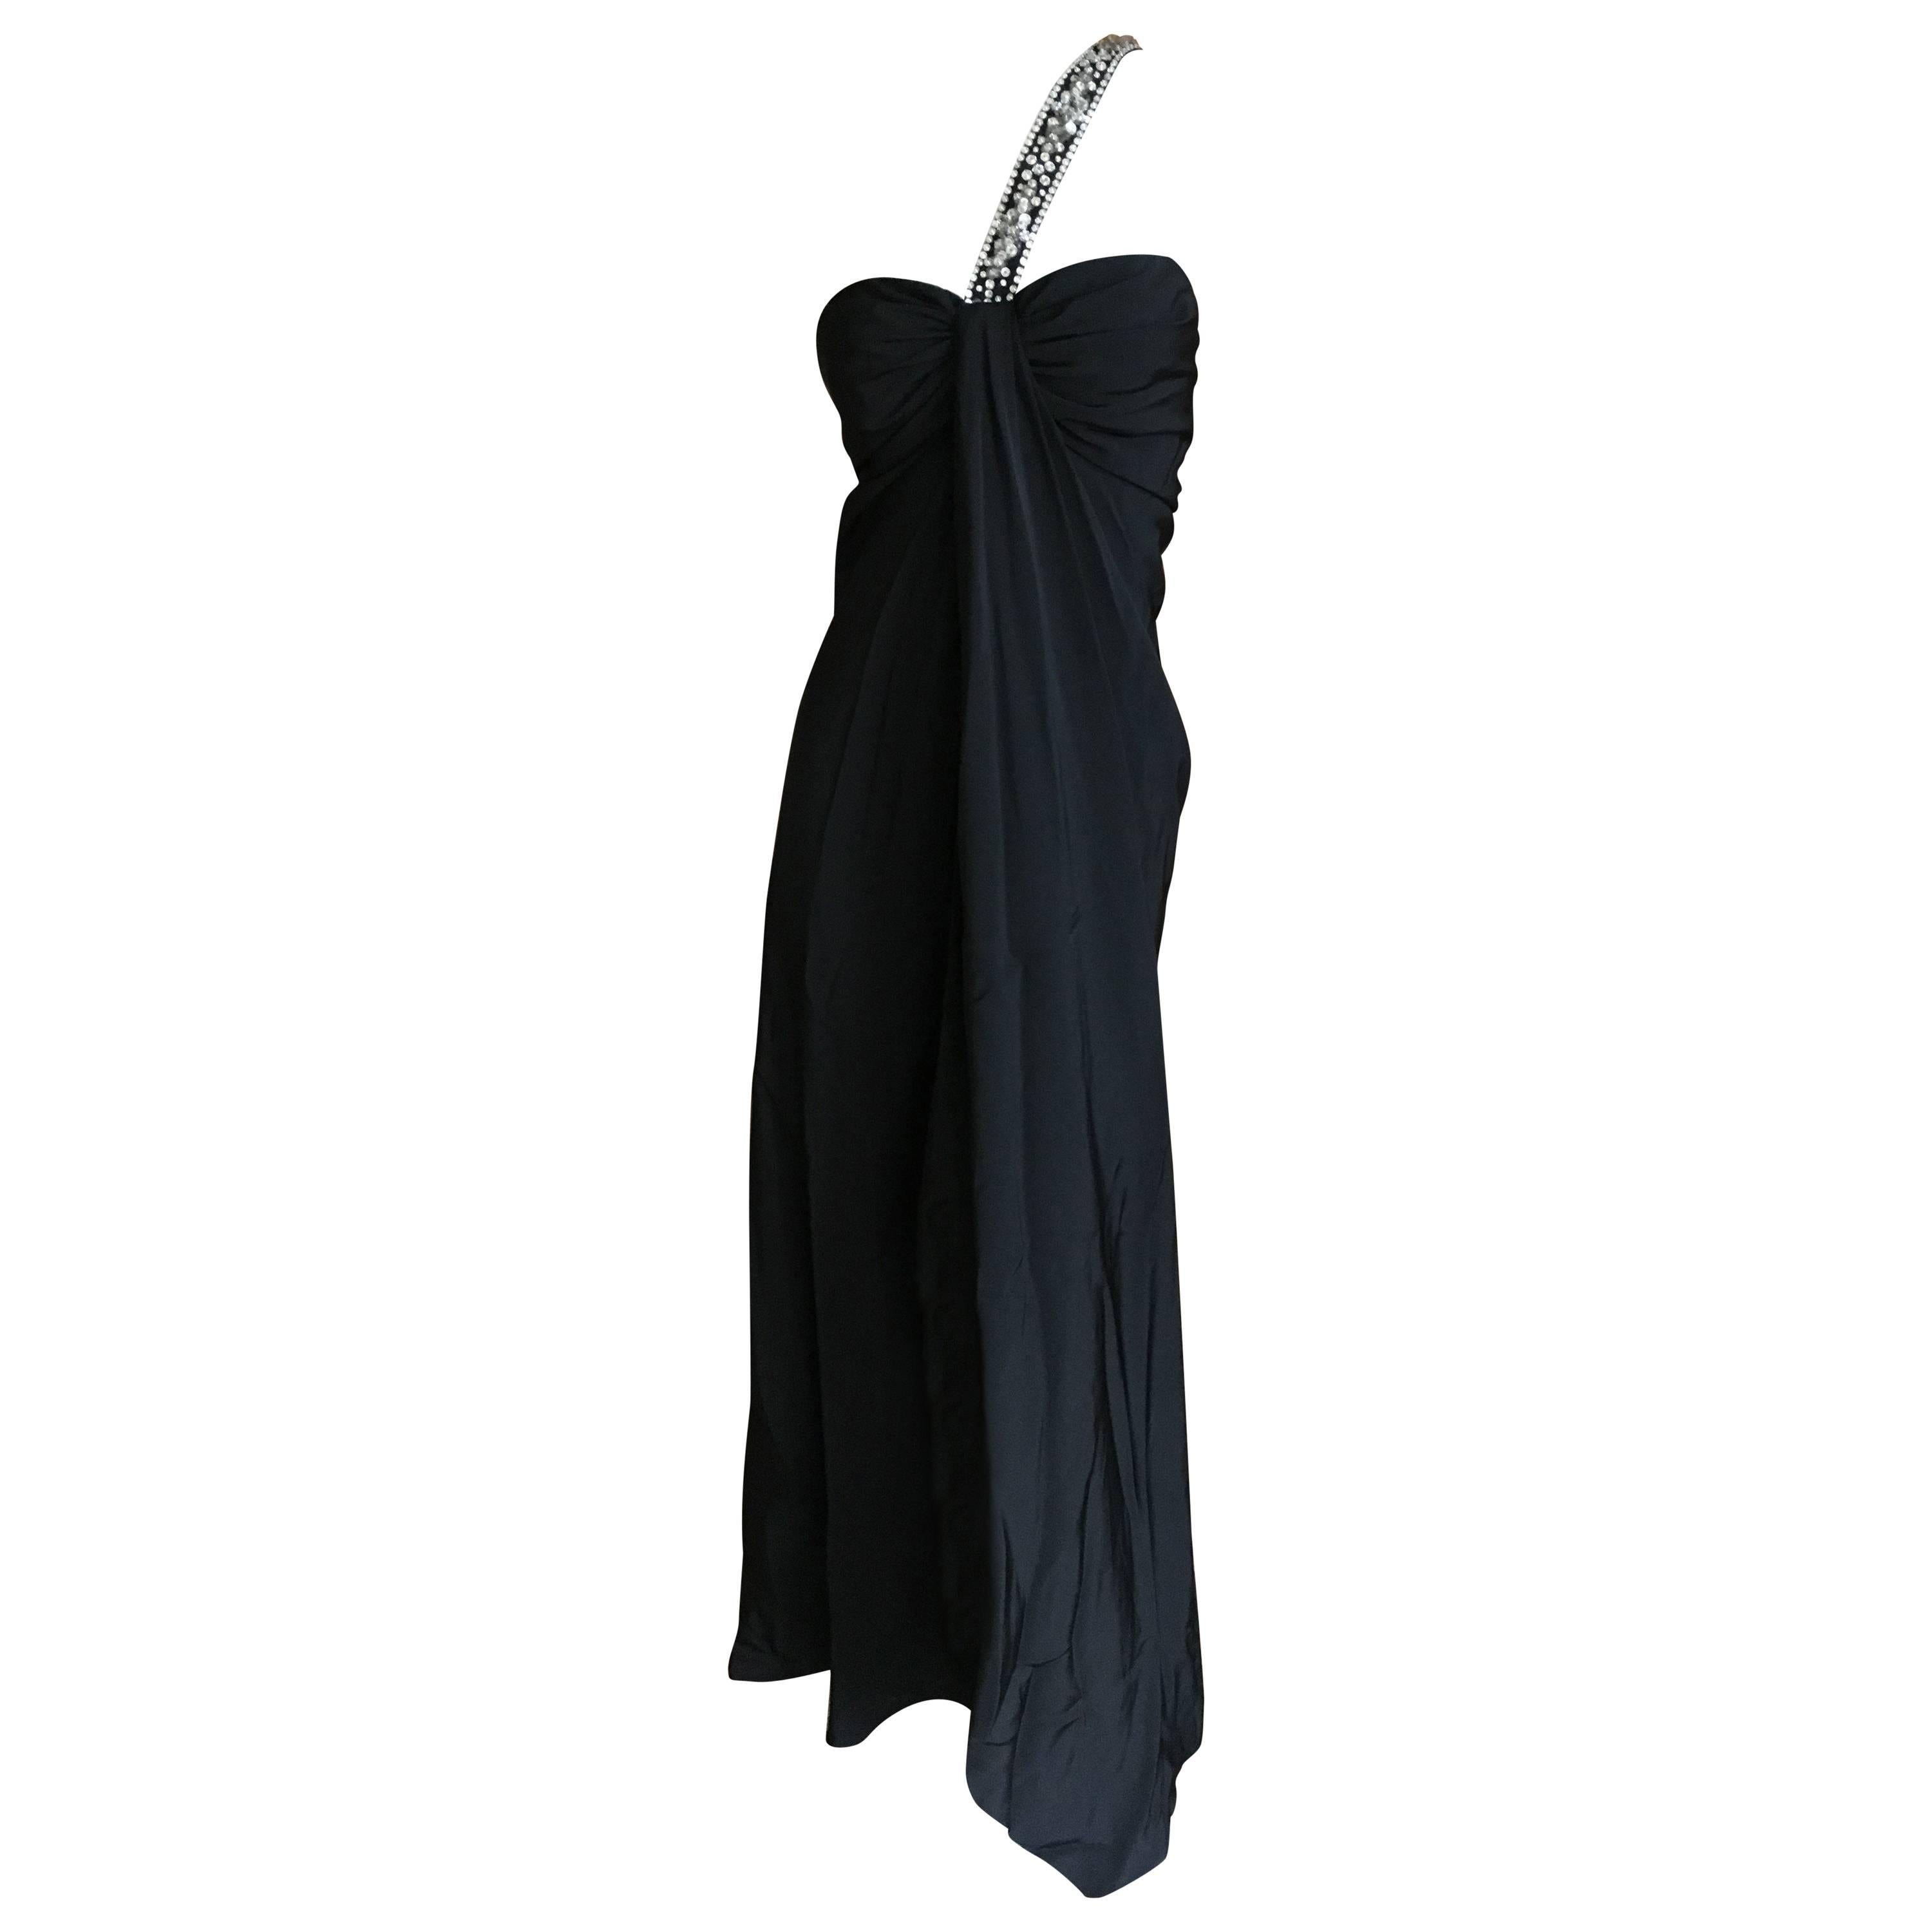  Galanos for Martha Park Avenue Black Silk Crepe Dress with Jeweled Strap For Sale